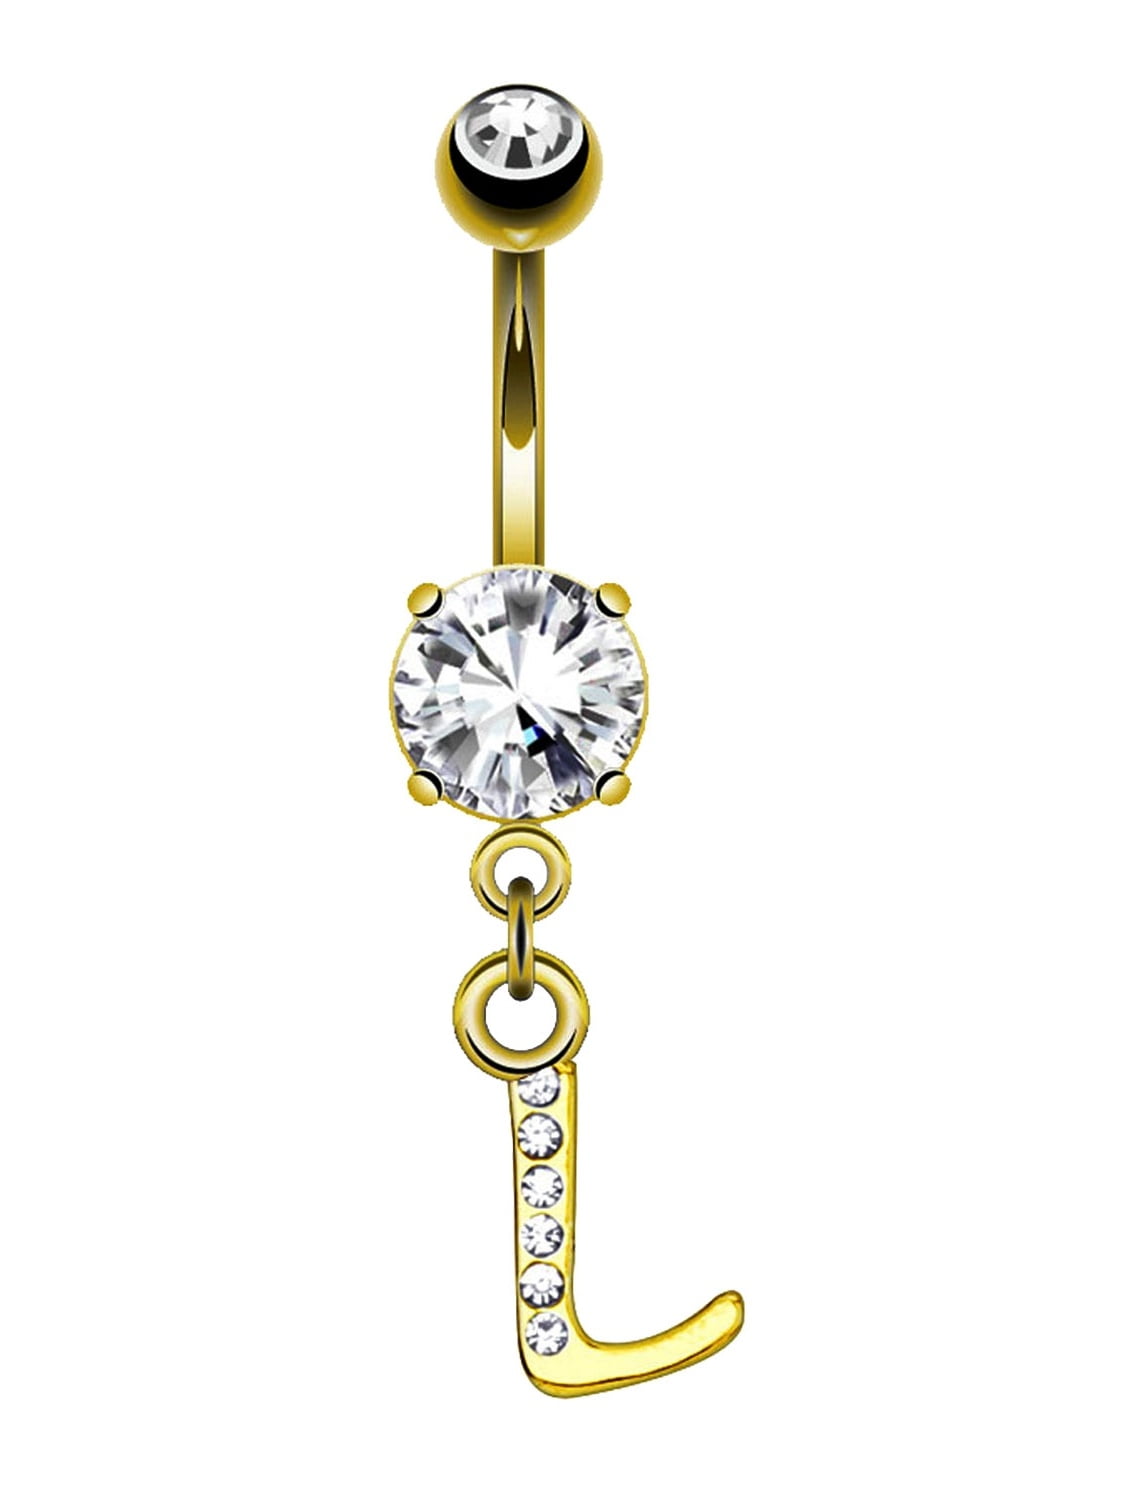 Ring c/w 8mm Ball and Gem Stainless Steel Belly Bar 